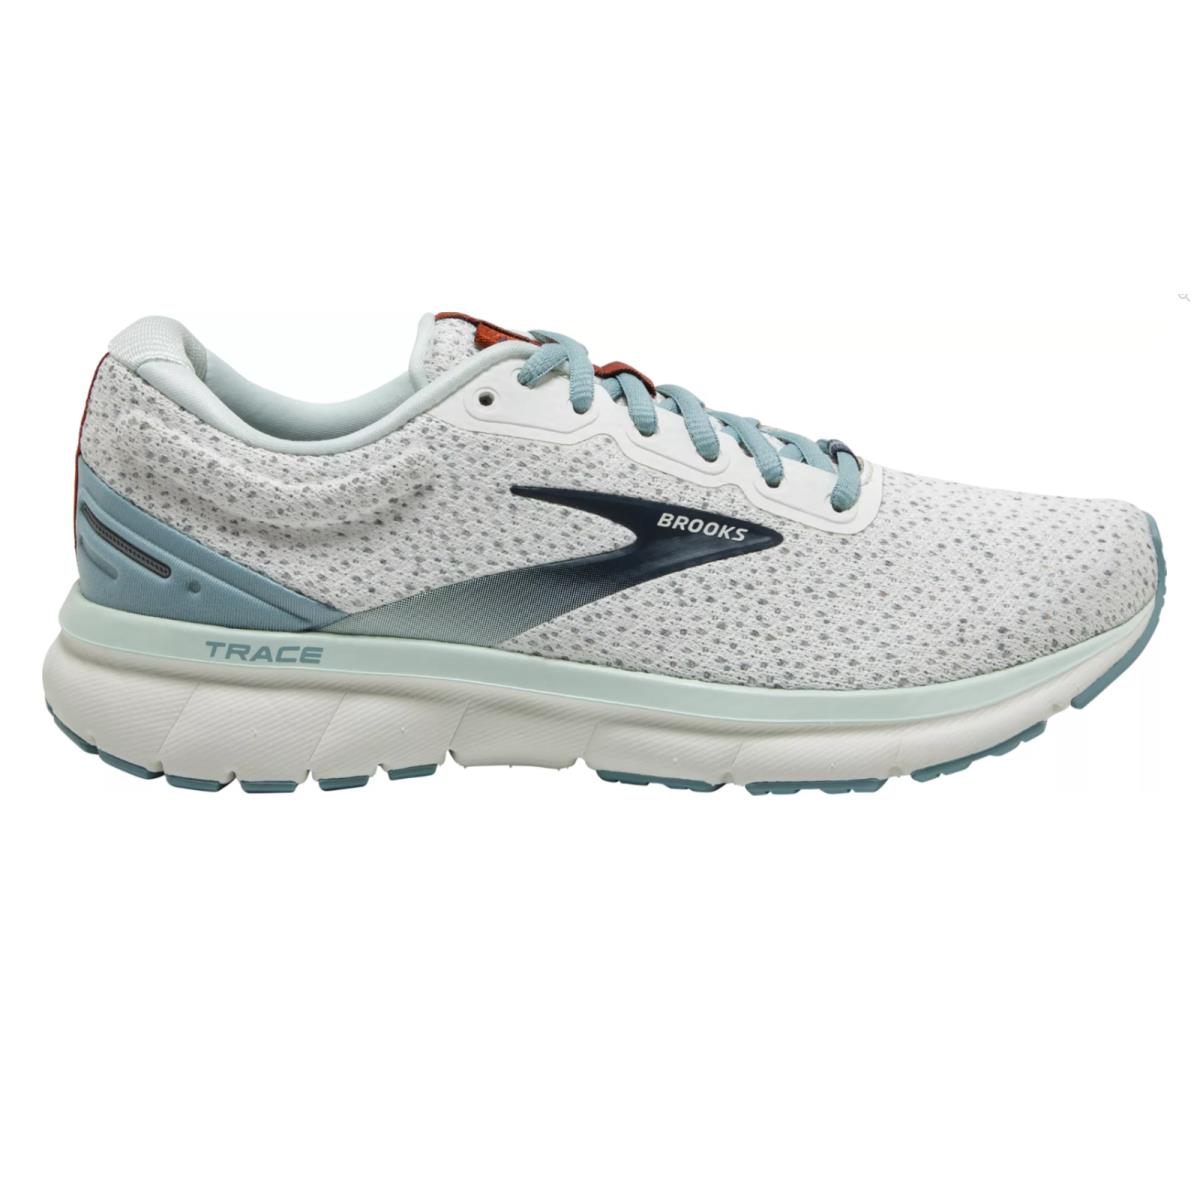 Brooks Trace Women`s Road Running Shoes 120351 1B 116 Size 6